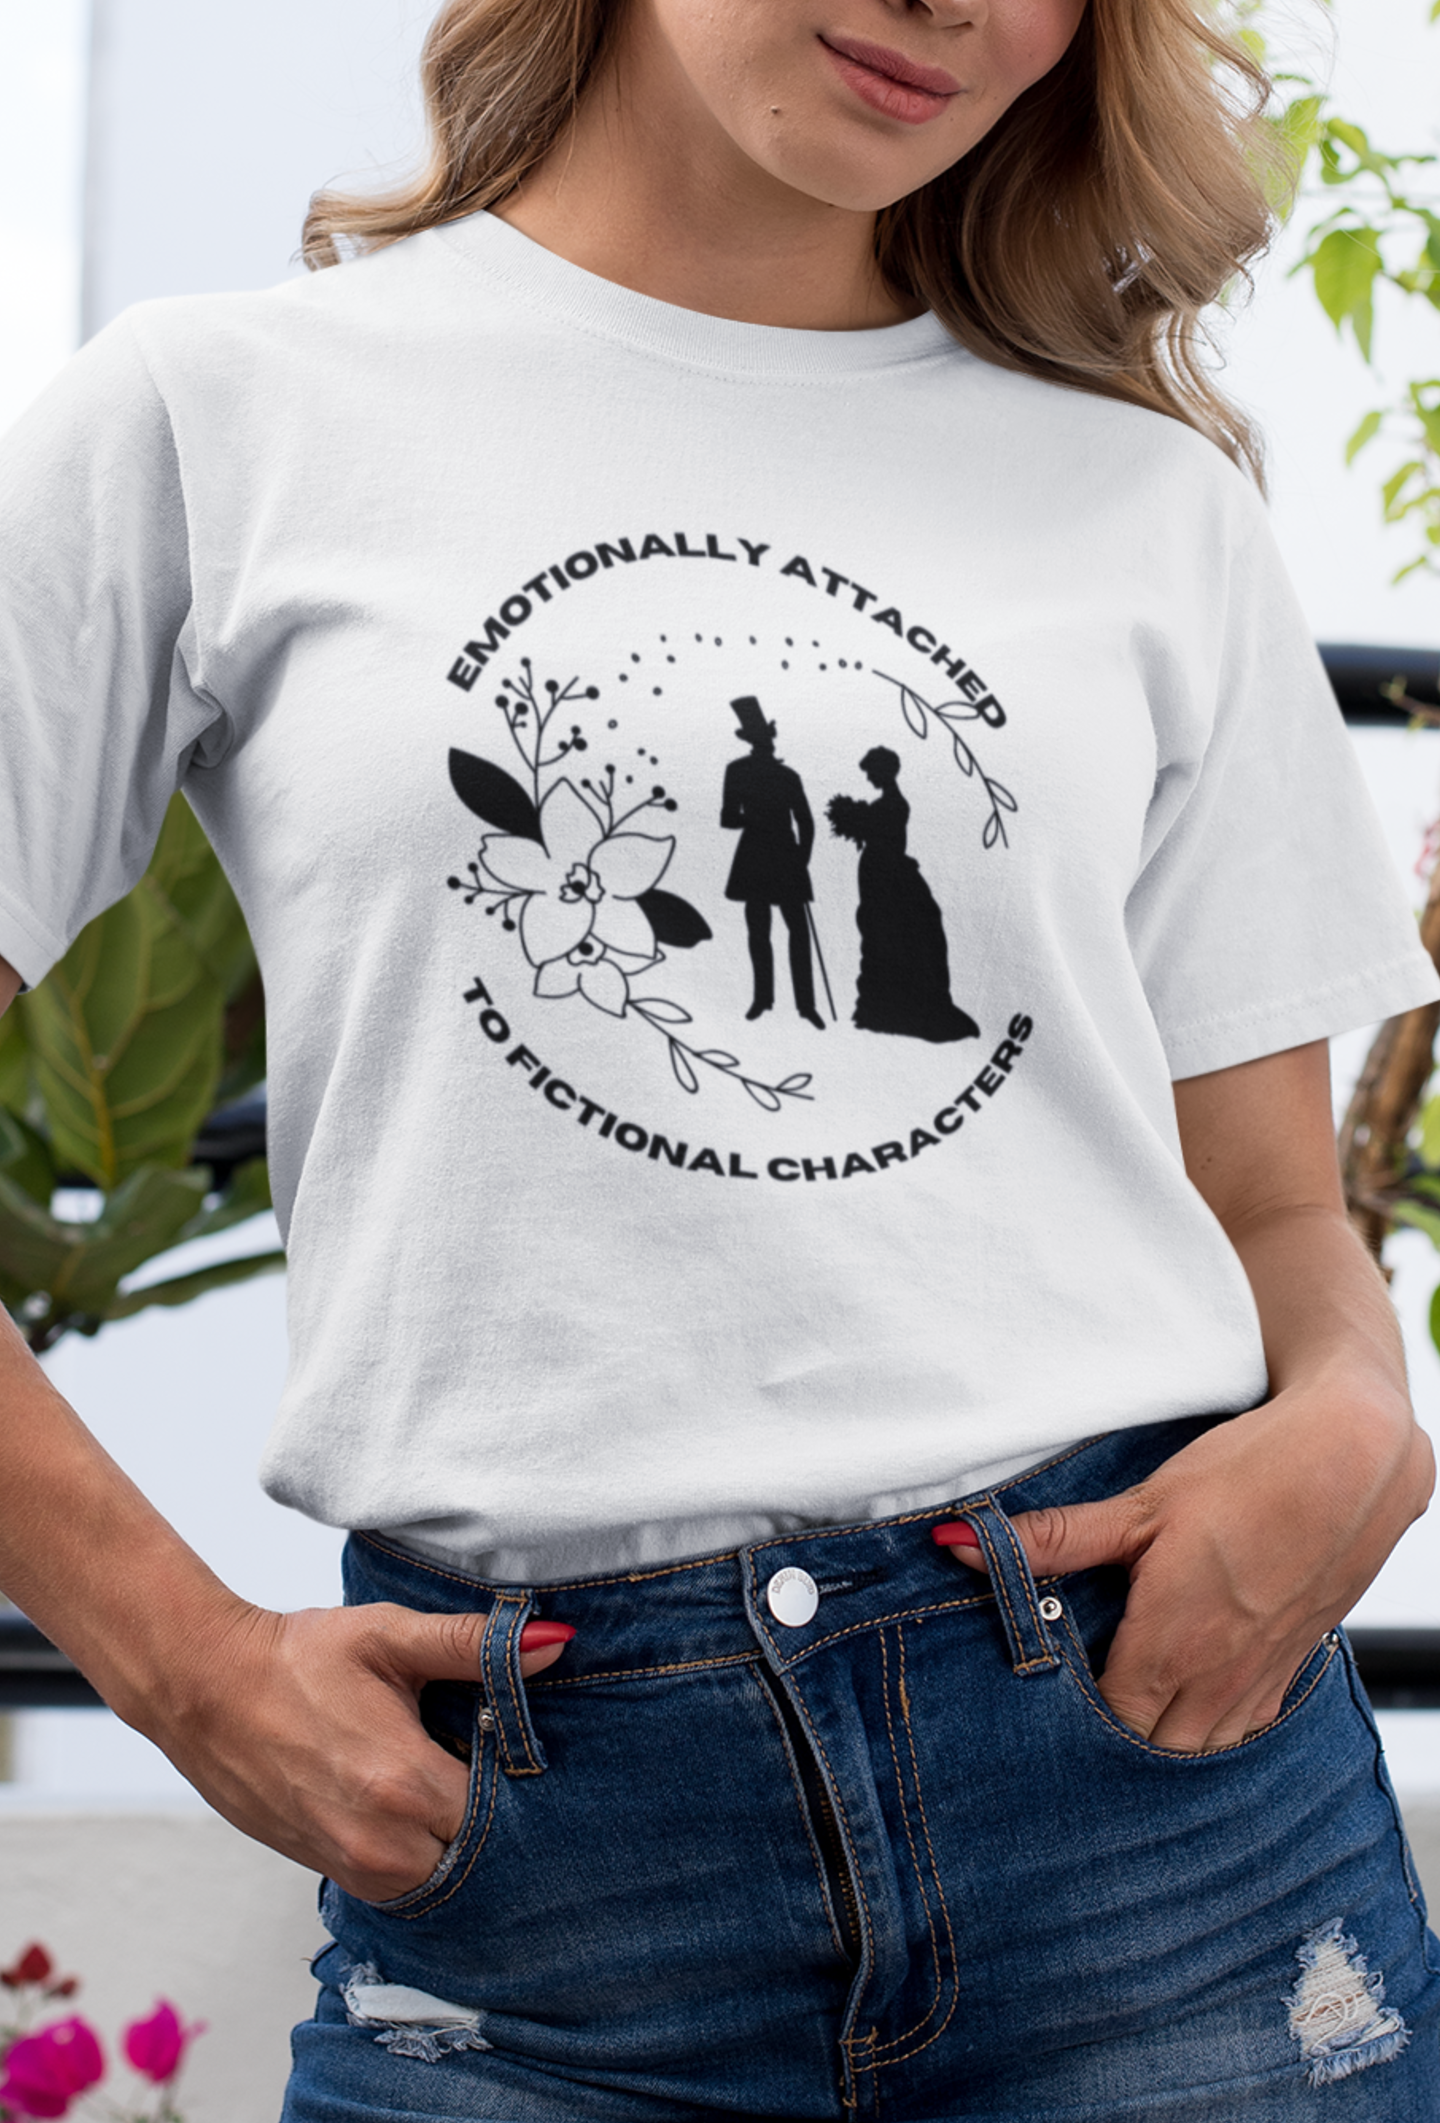 Emotionally Attached To Fictional Characters - Funny Bookish T-Shirt